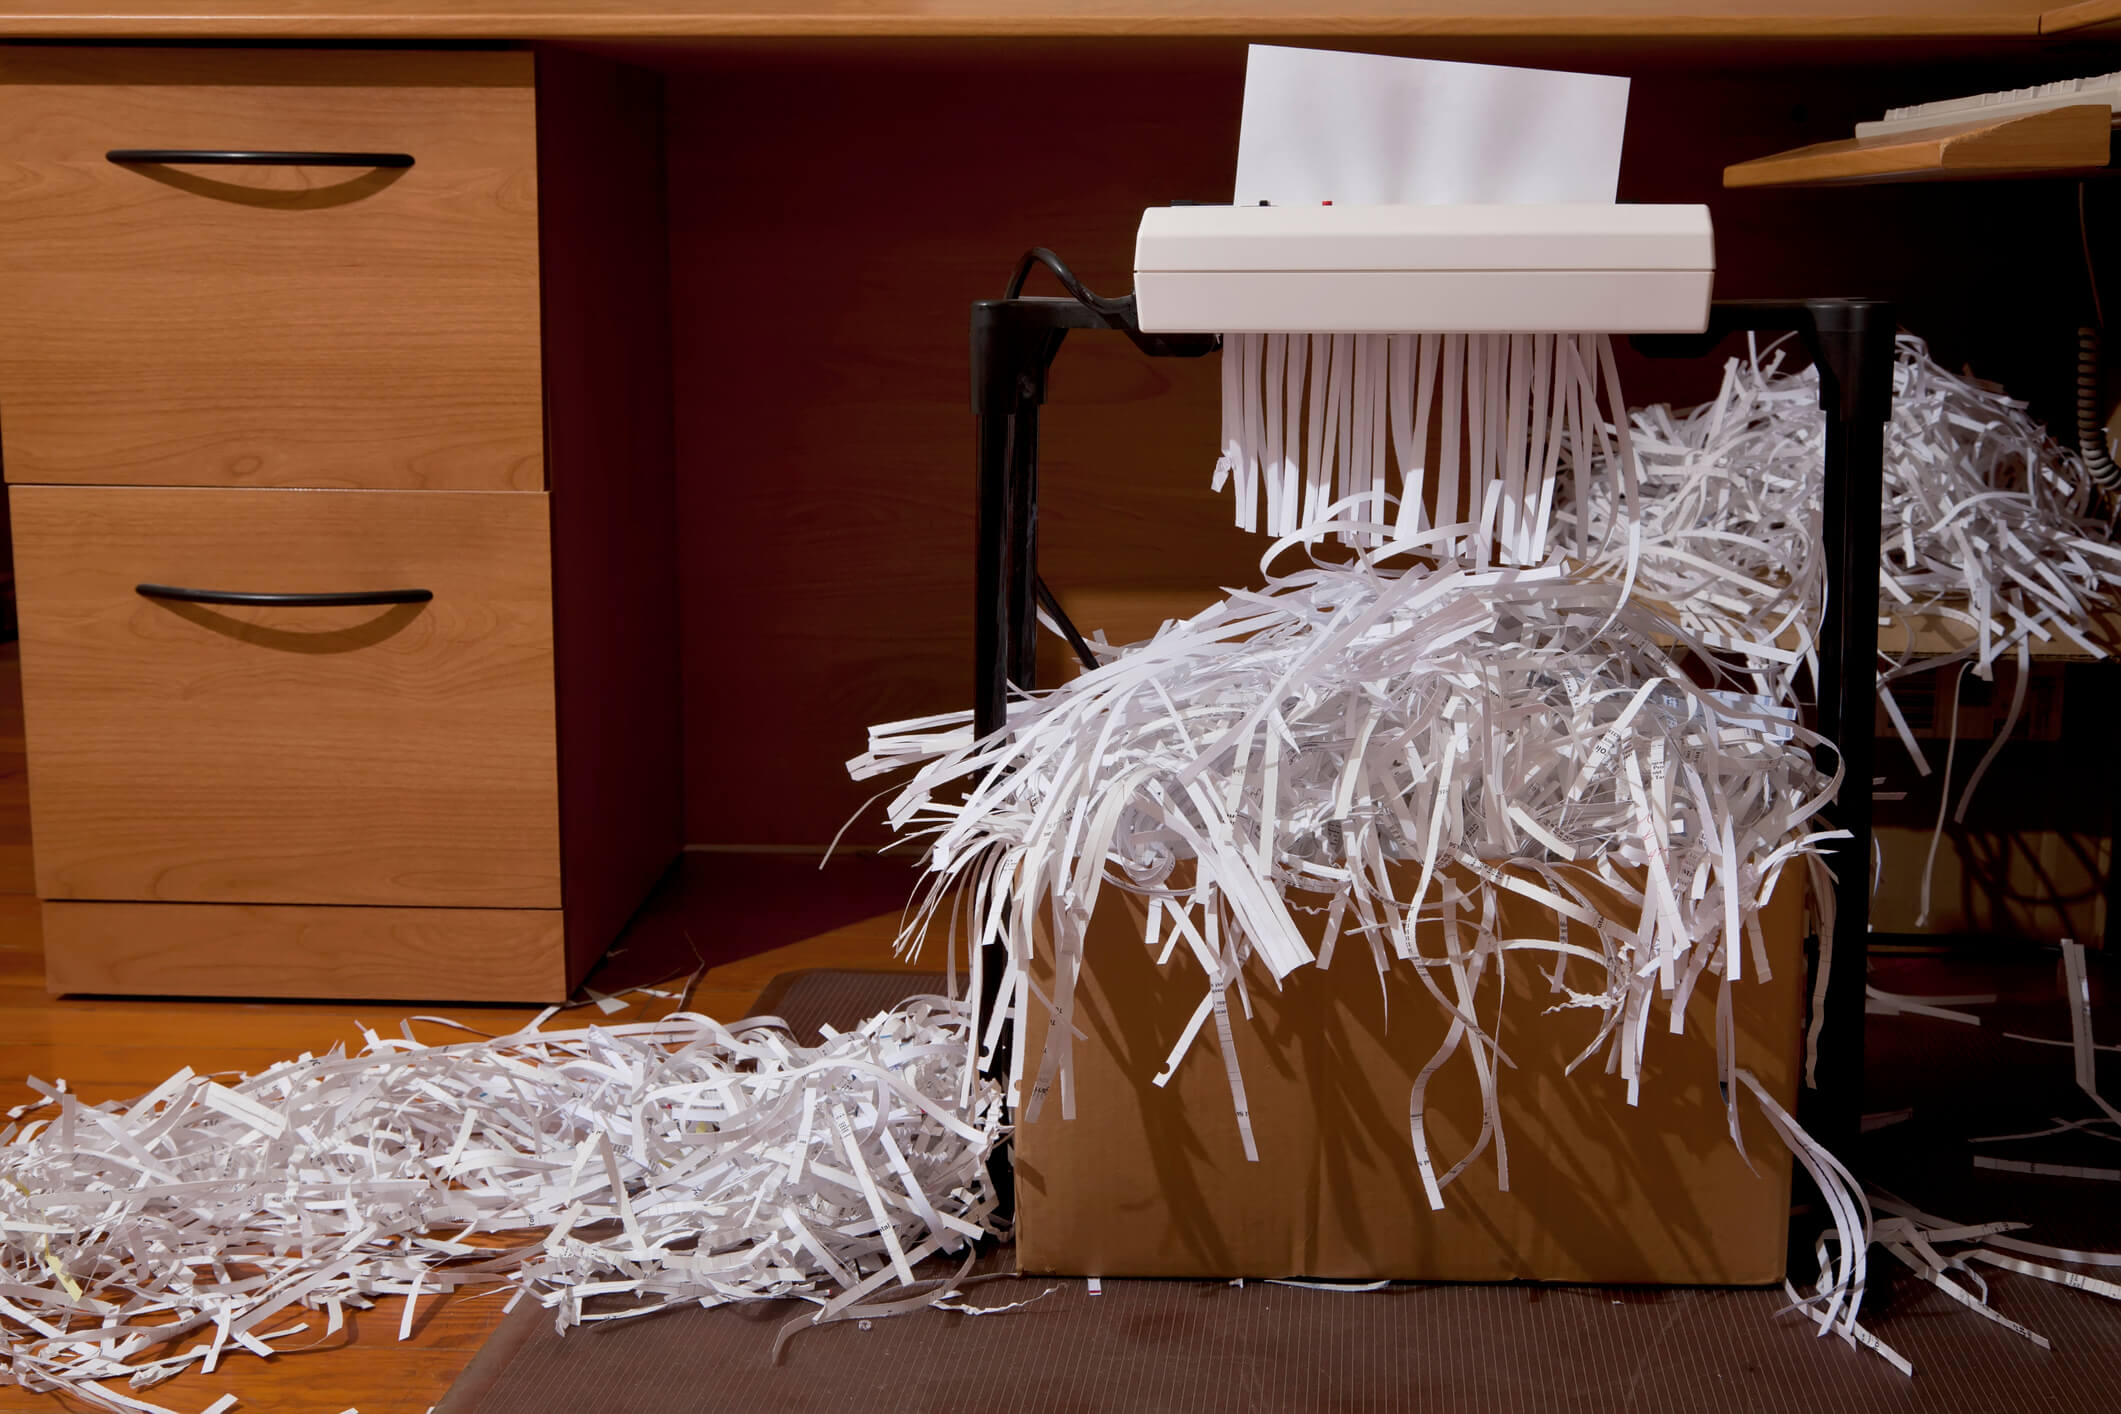 Office with Shredded Documents